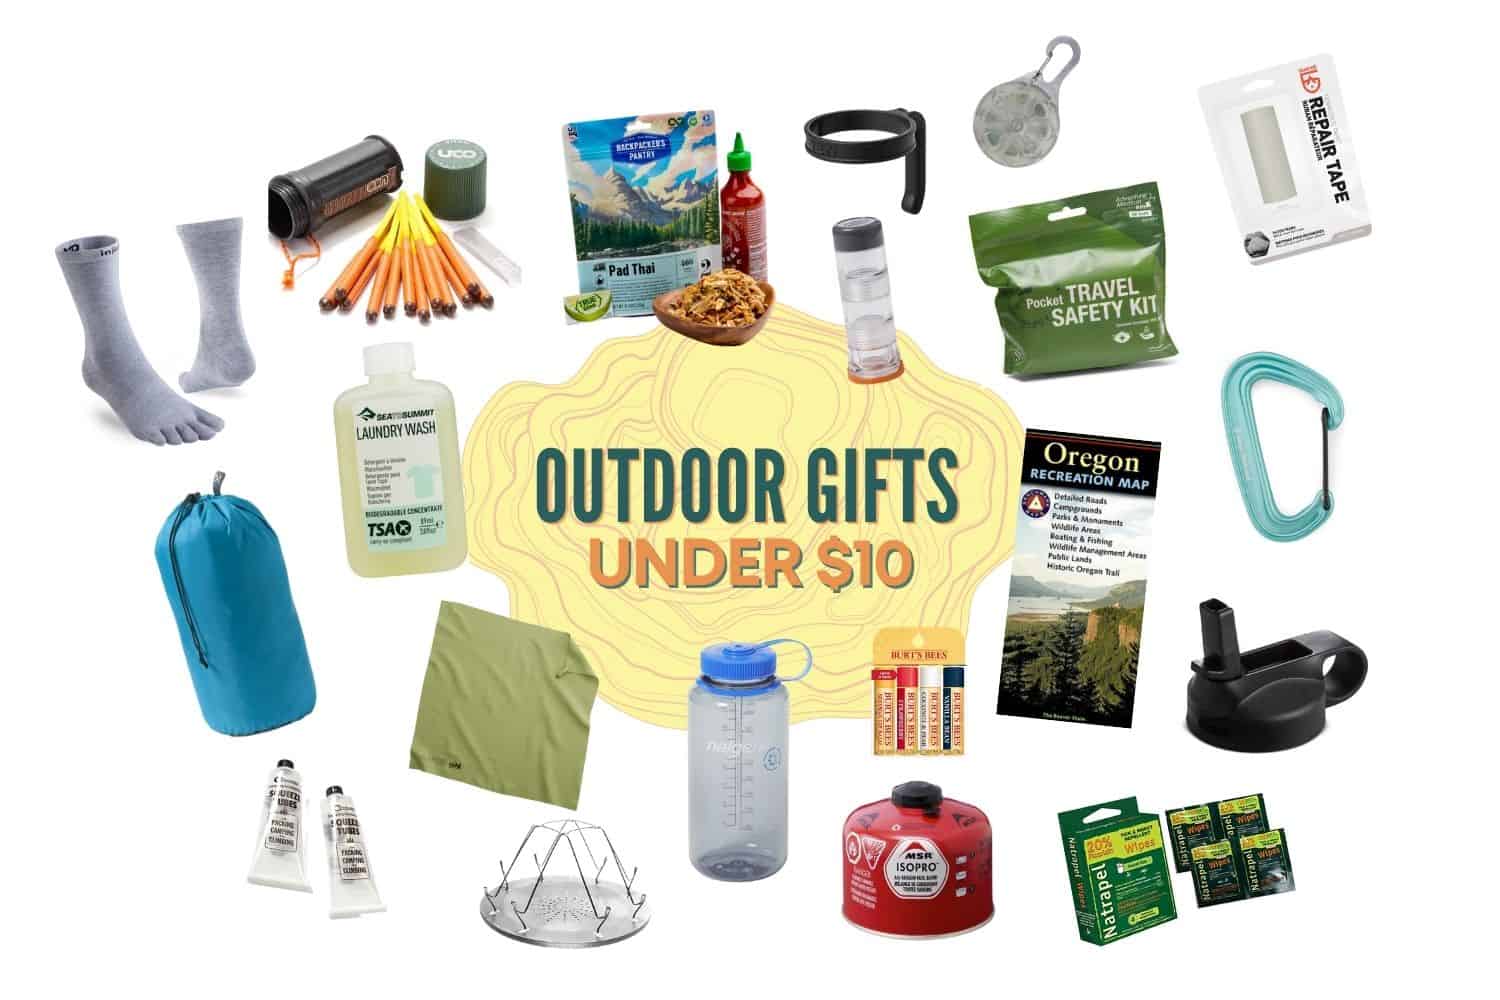 https://www.themandagies.com/wp-content/uploads/2021/11/Stocking-Stuffer-Outdoor-Gifts-Under-10-The-Mandagies-Feature-Images.jpg